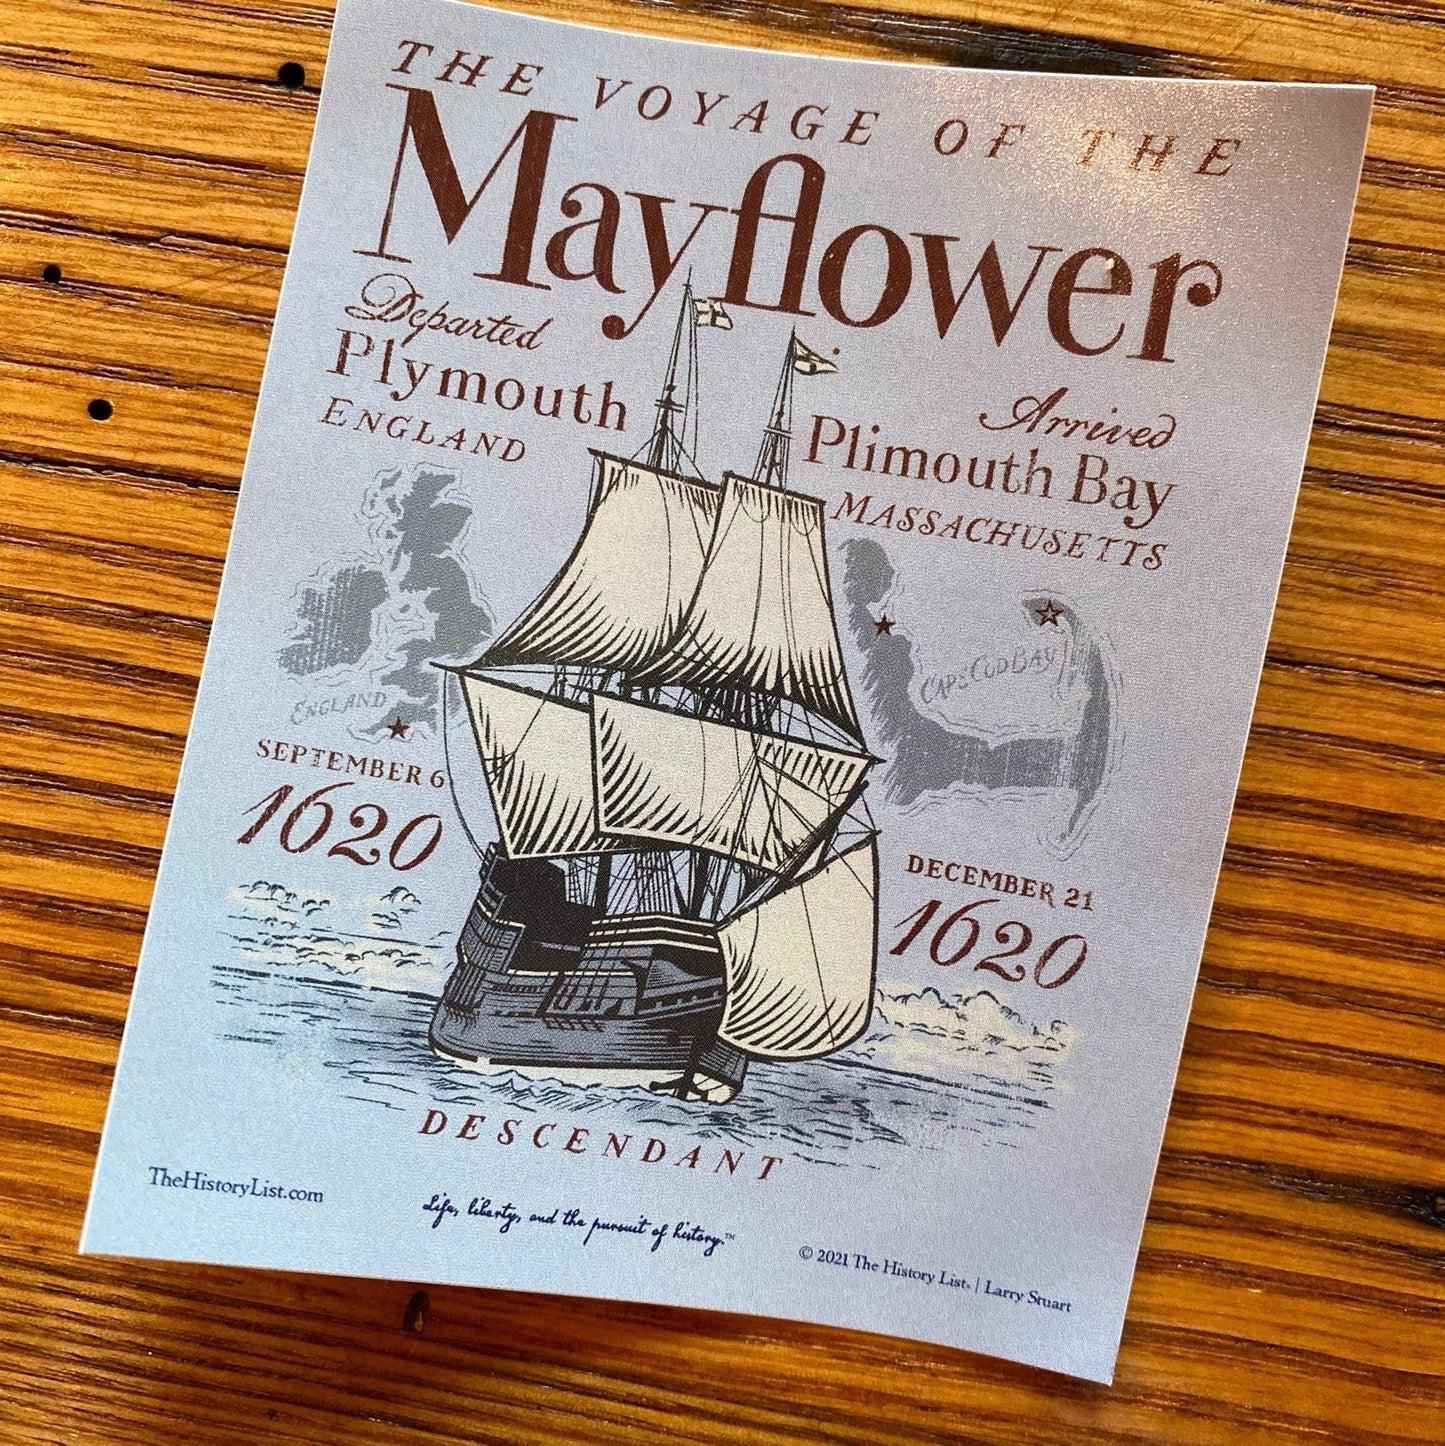 "The Voyage of the Mayflower" Sticker from the History List Store